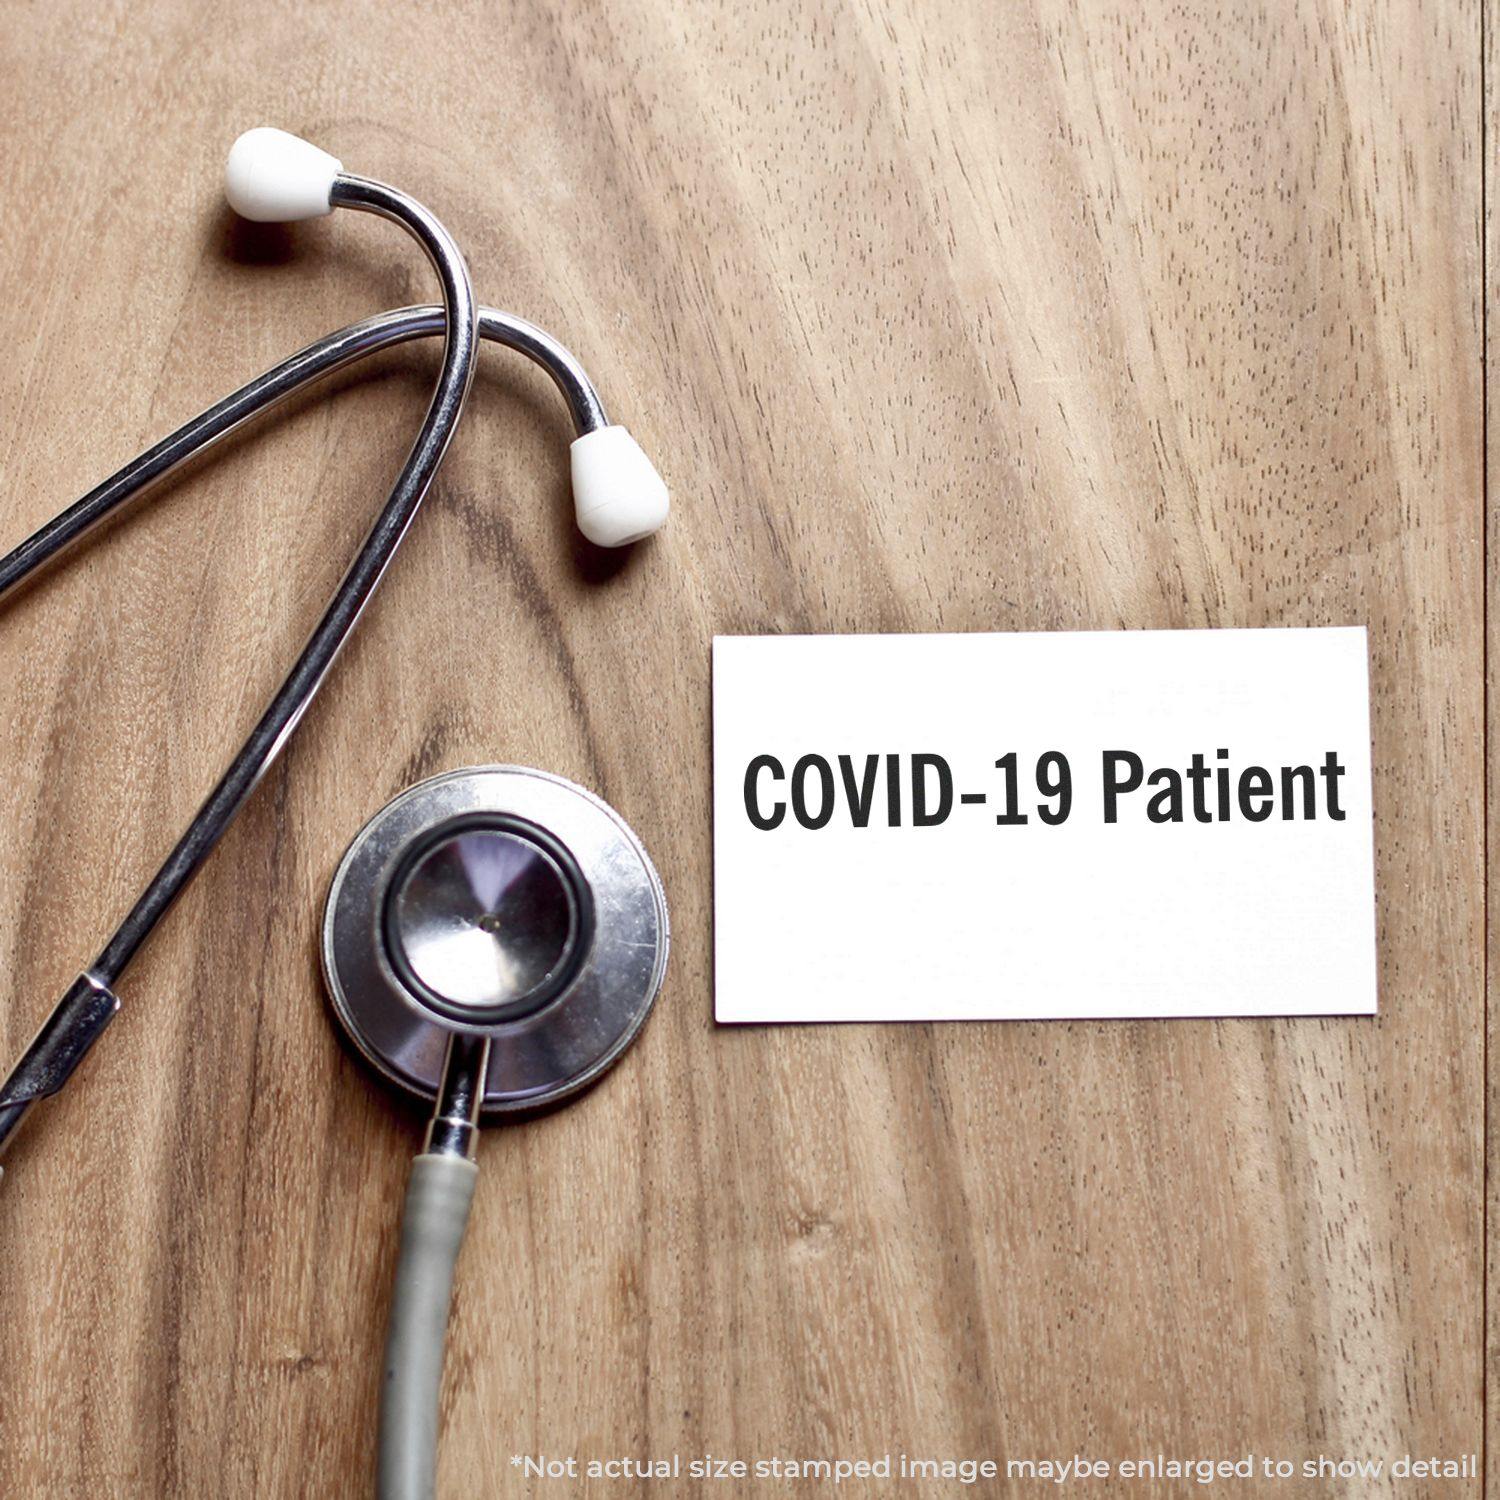 A self-inking stamp with a stamped image showing how the text "COVID-19 Patient" in a large font is displayed by it after stamping.